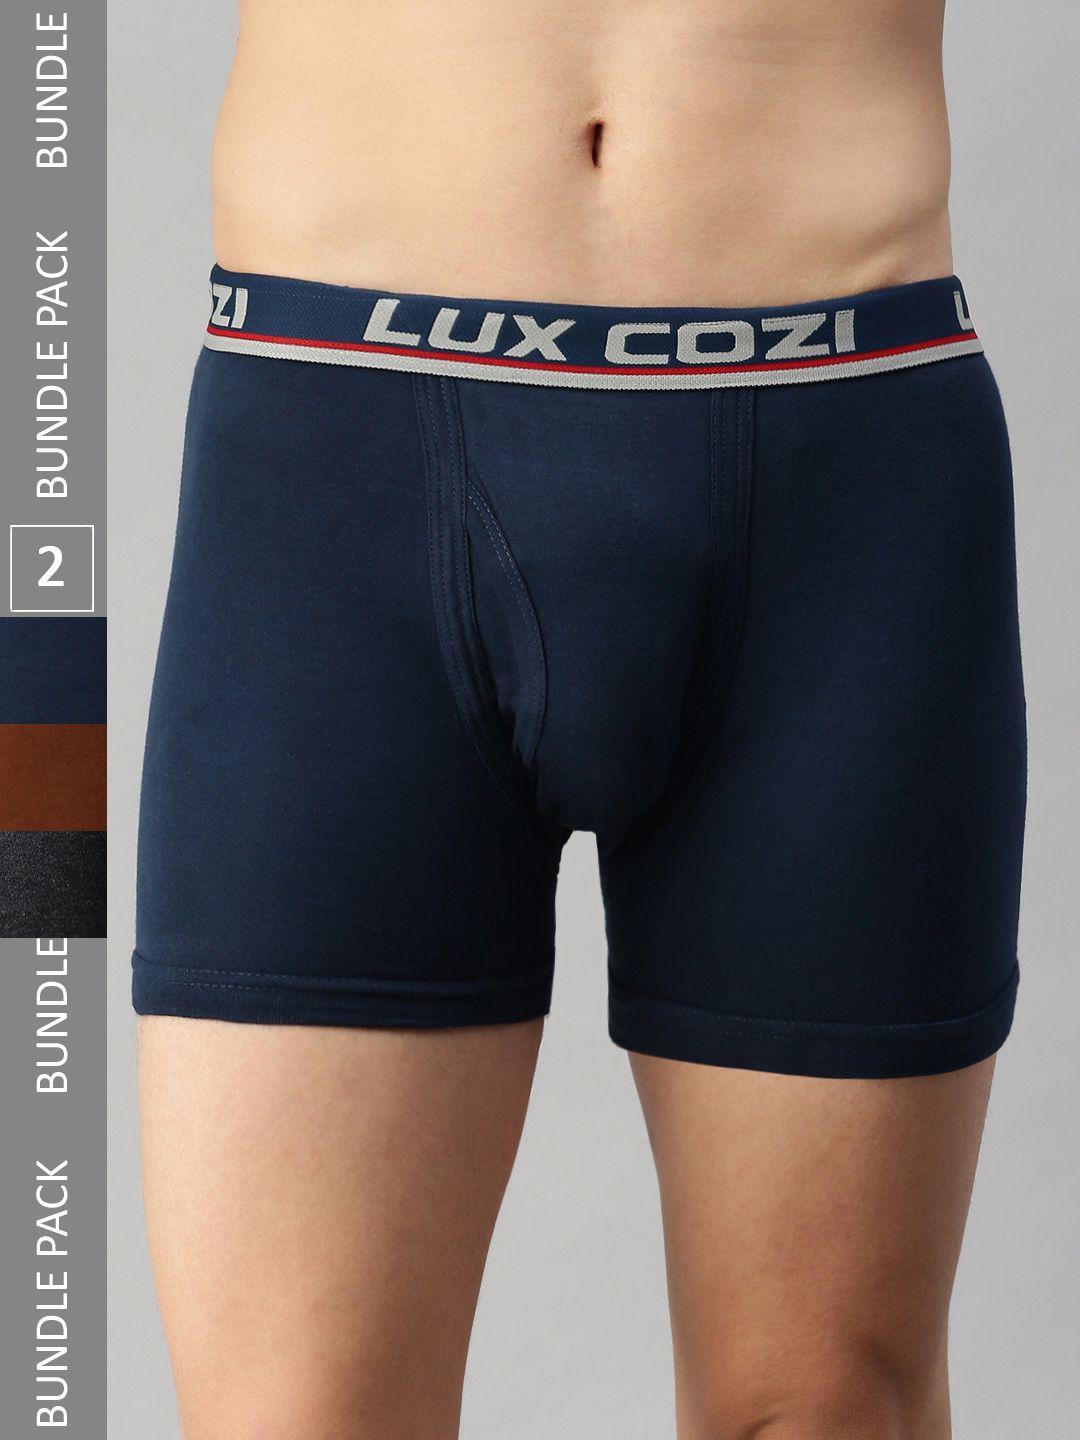 lux cozi men pack of 3 skin-friendly label free comfort long cotton trunk